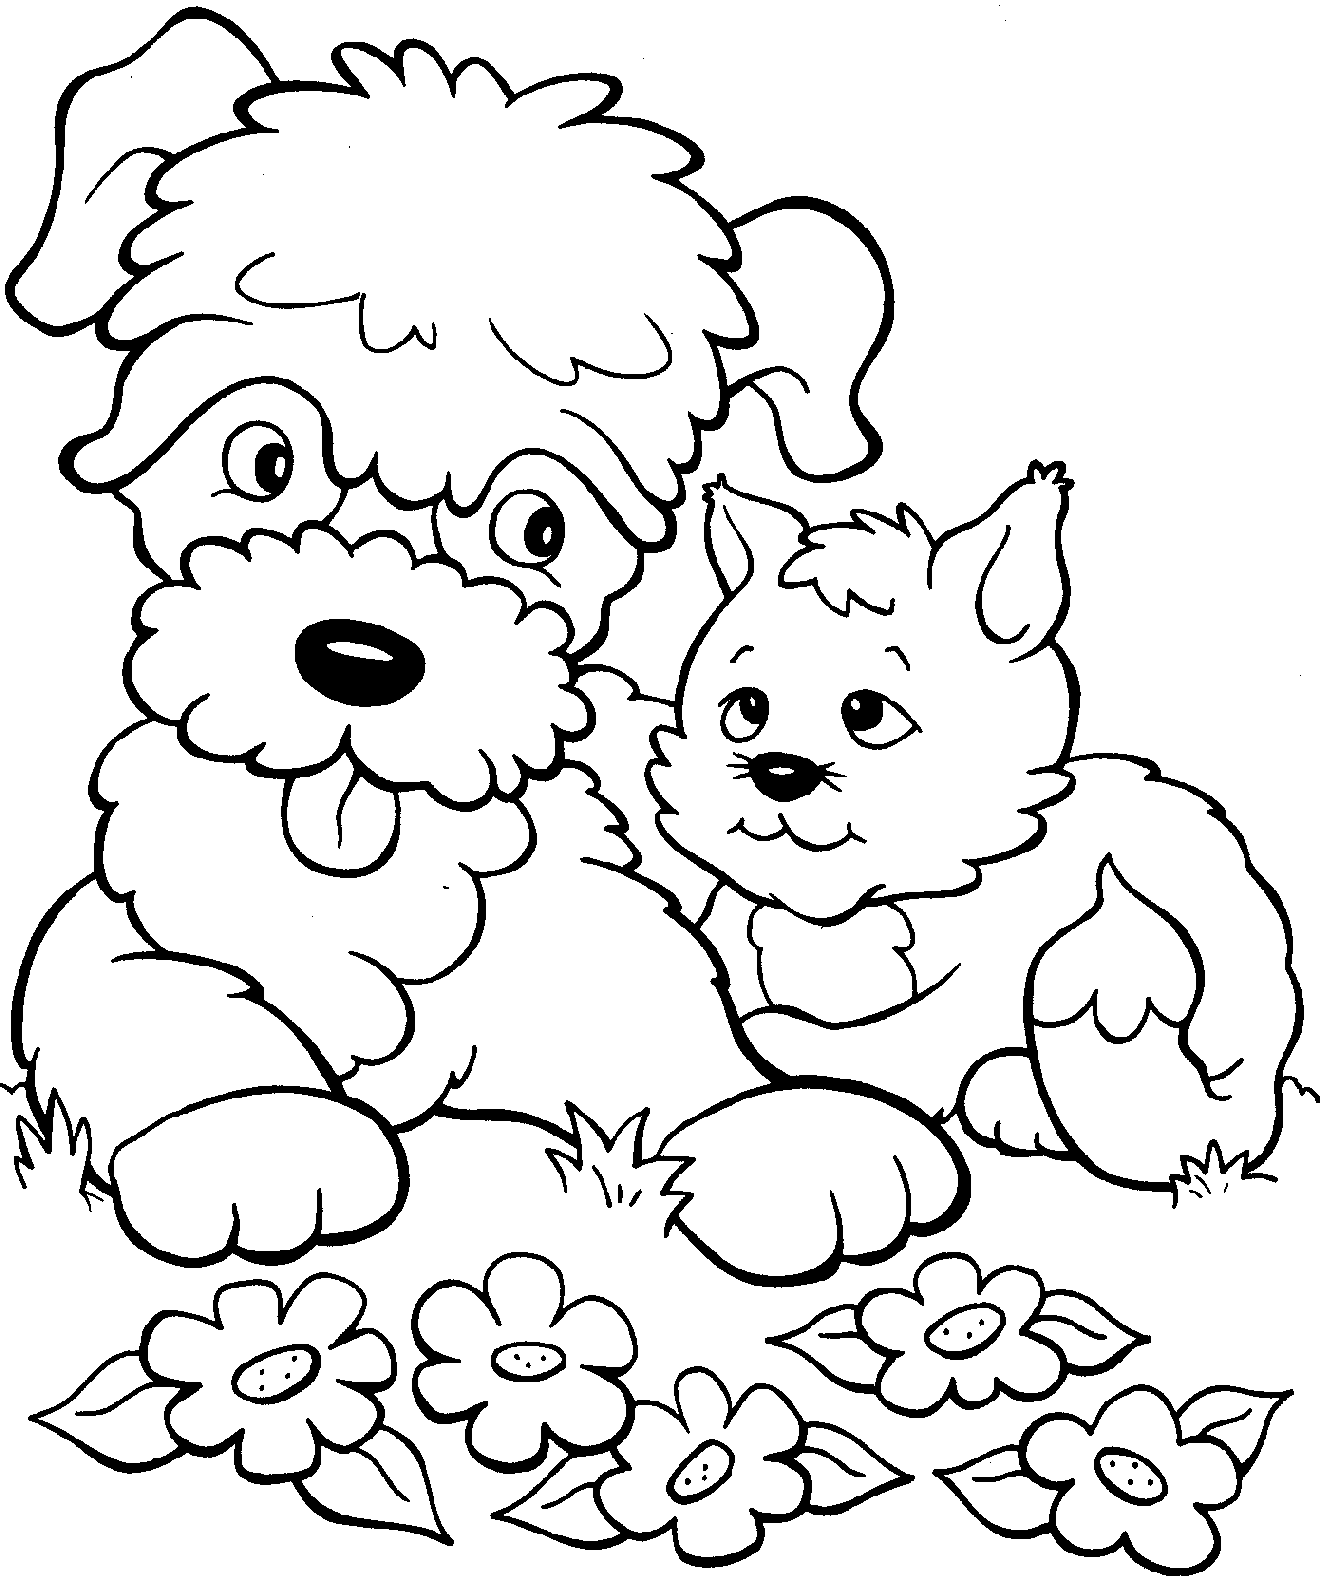 kitten color page free printable kitten coloring pages for kids best kitten color page 